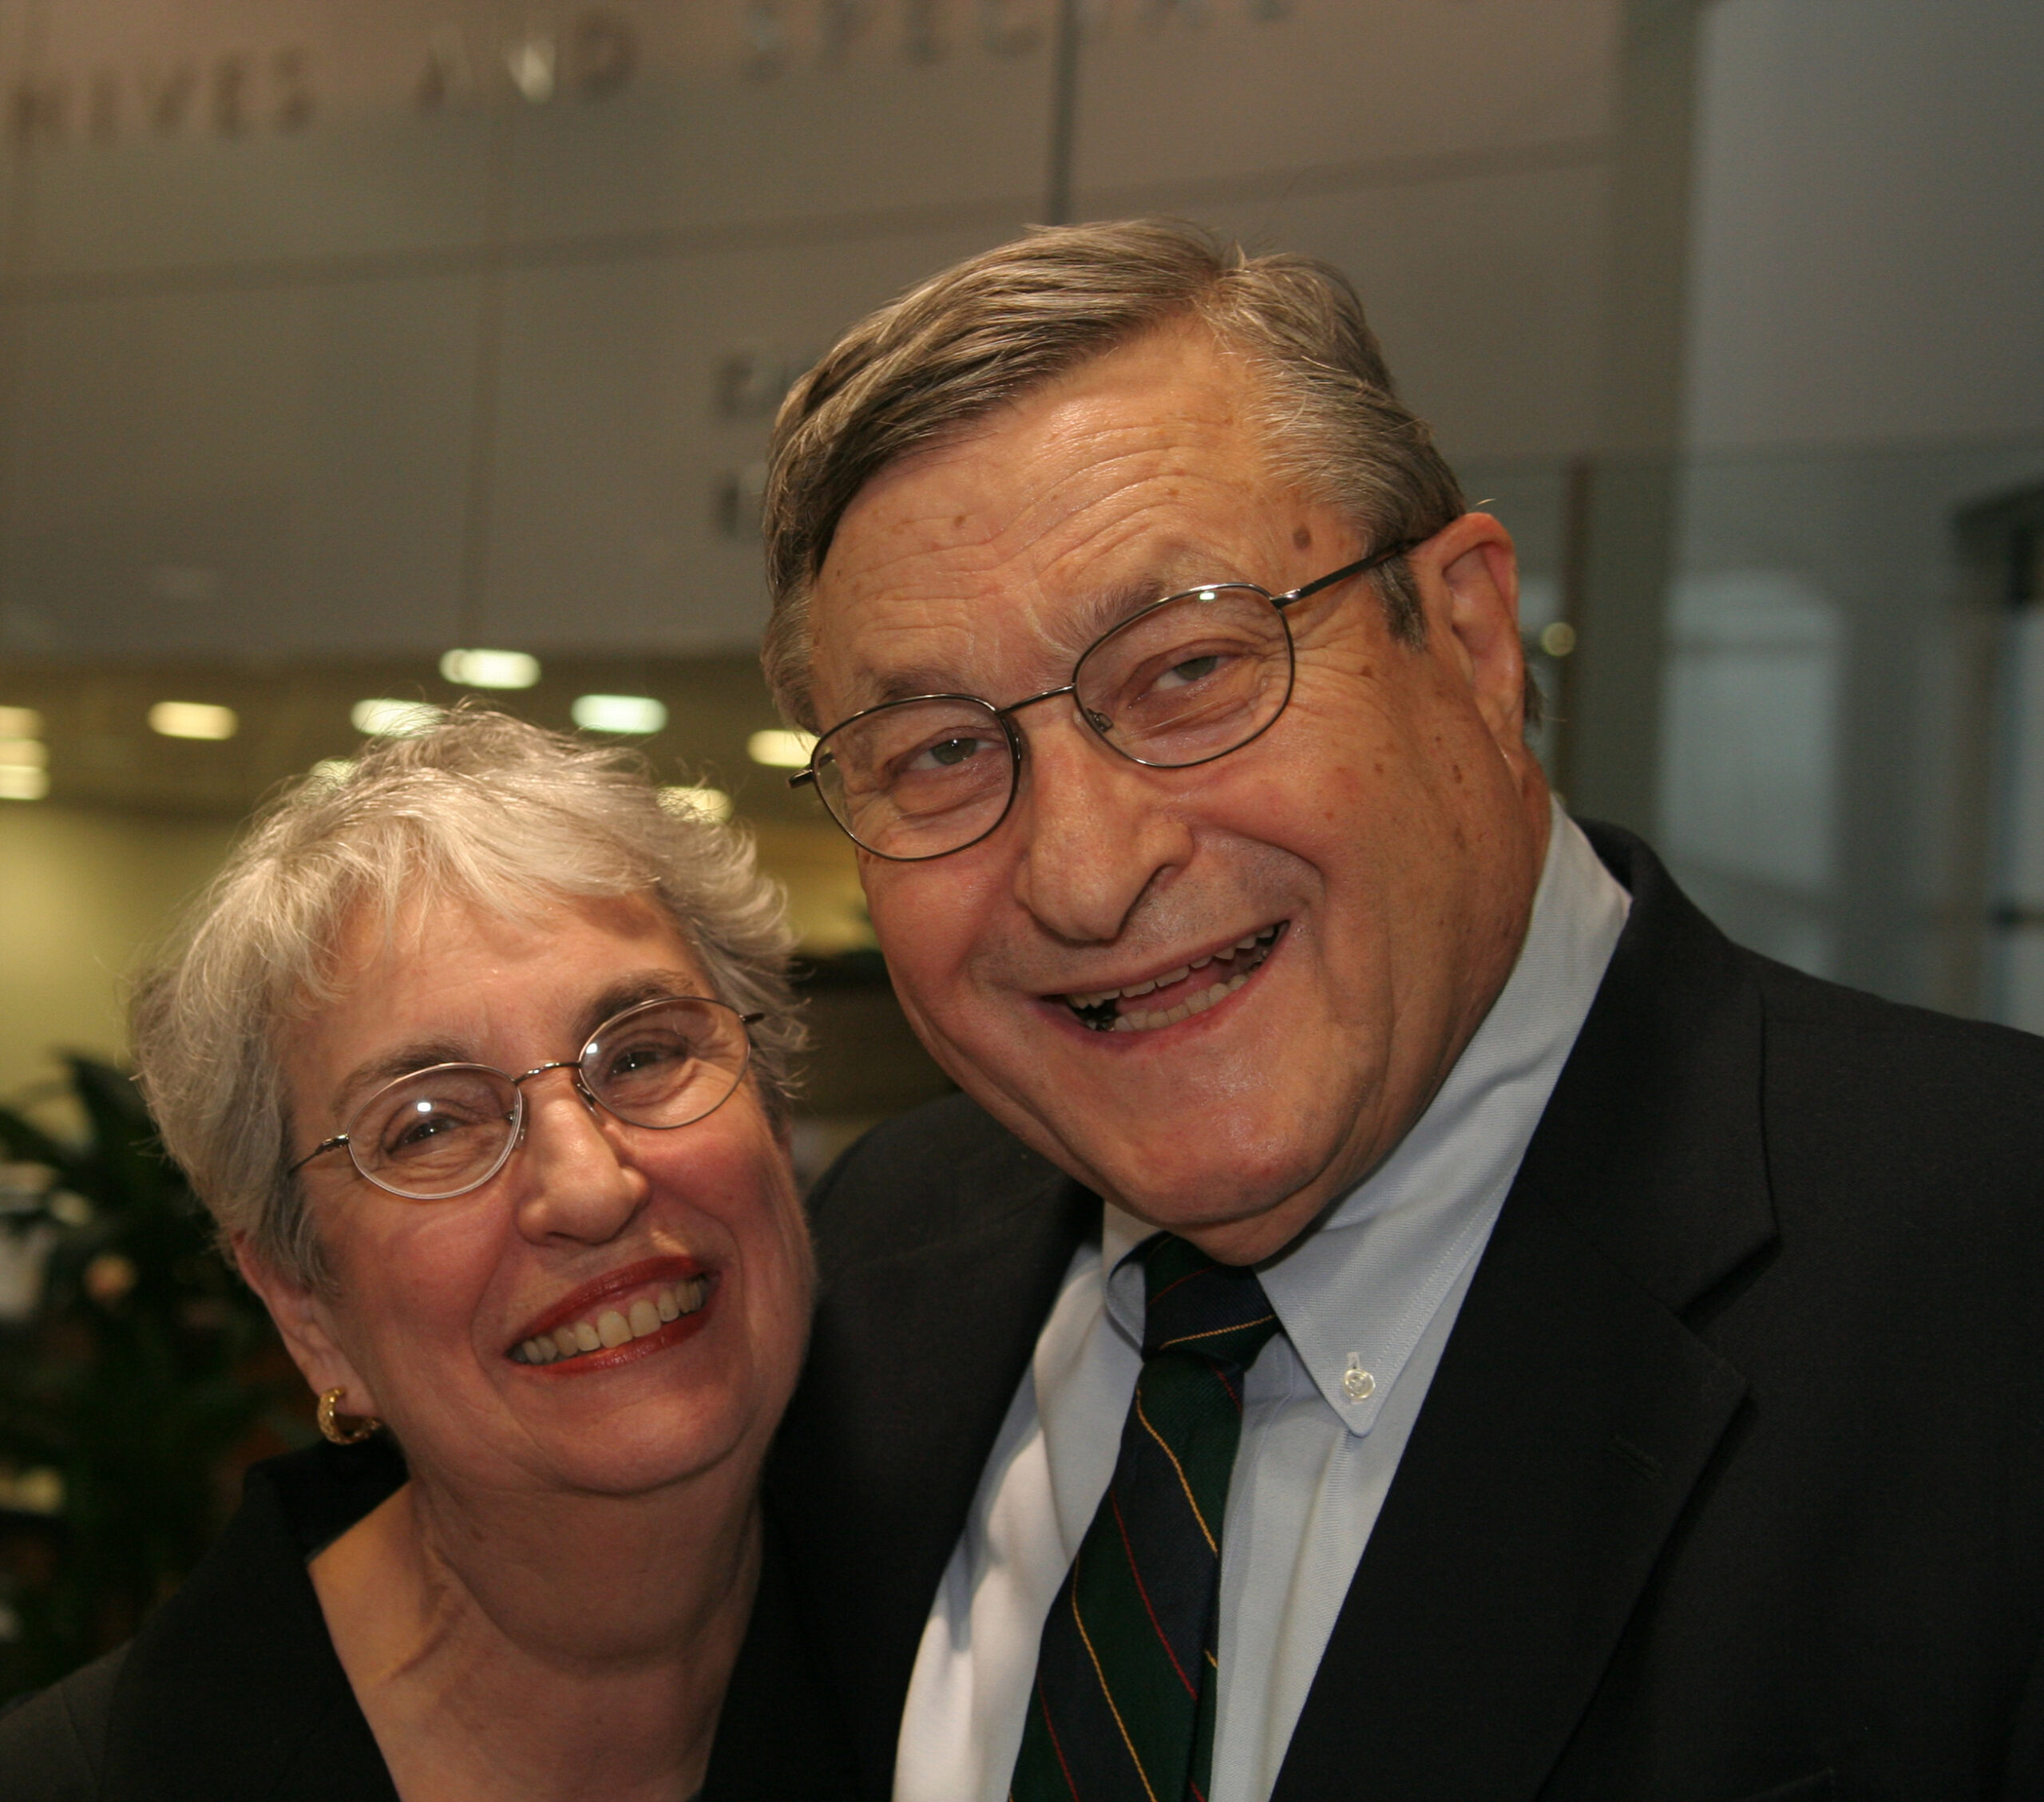 Carol and Emanuel Parzen smile for the camera at an event held in his honor at Texas A&amp;M University